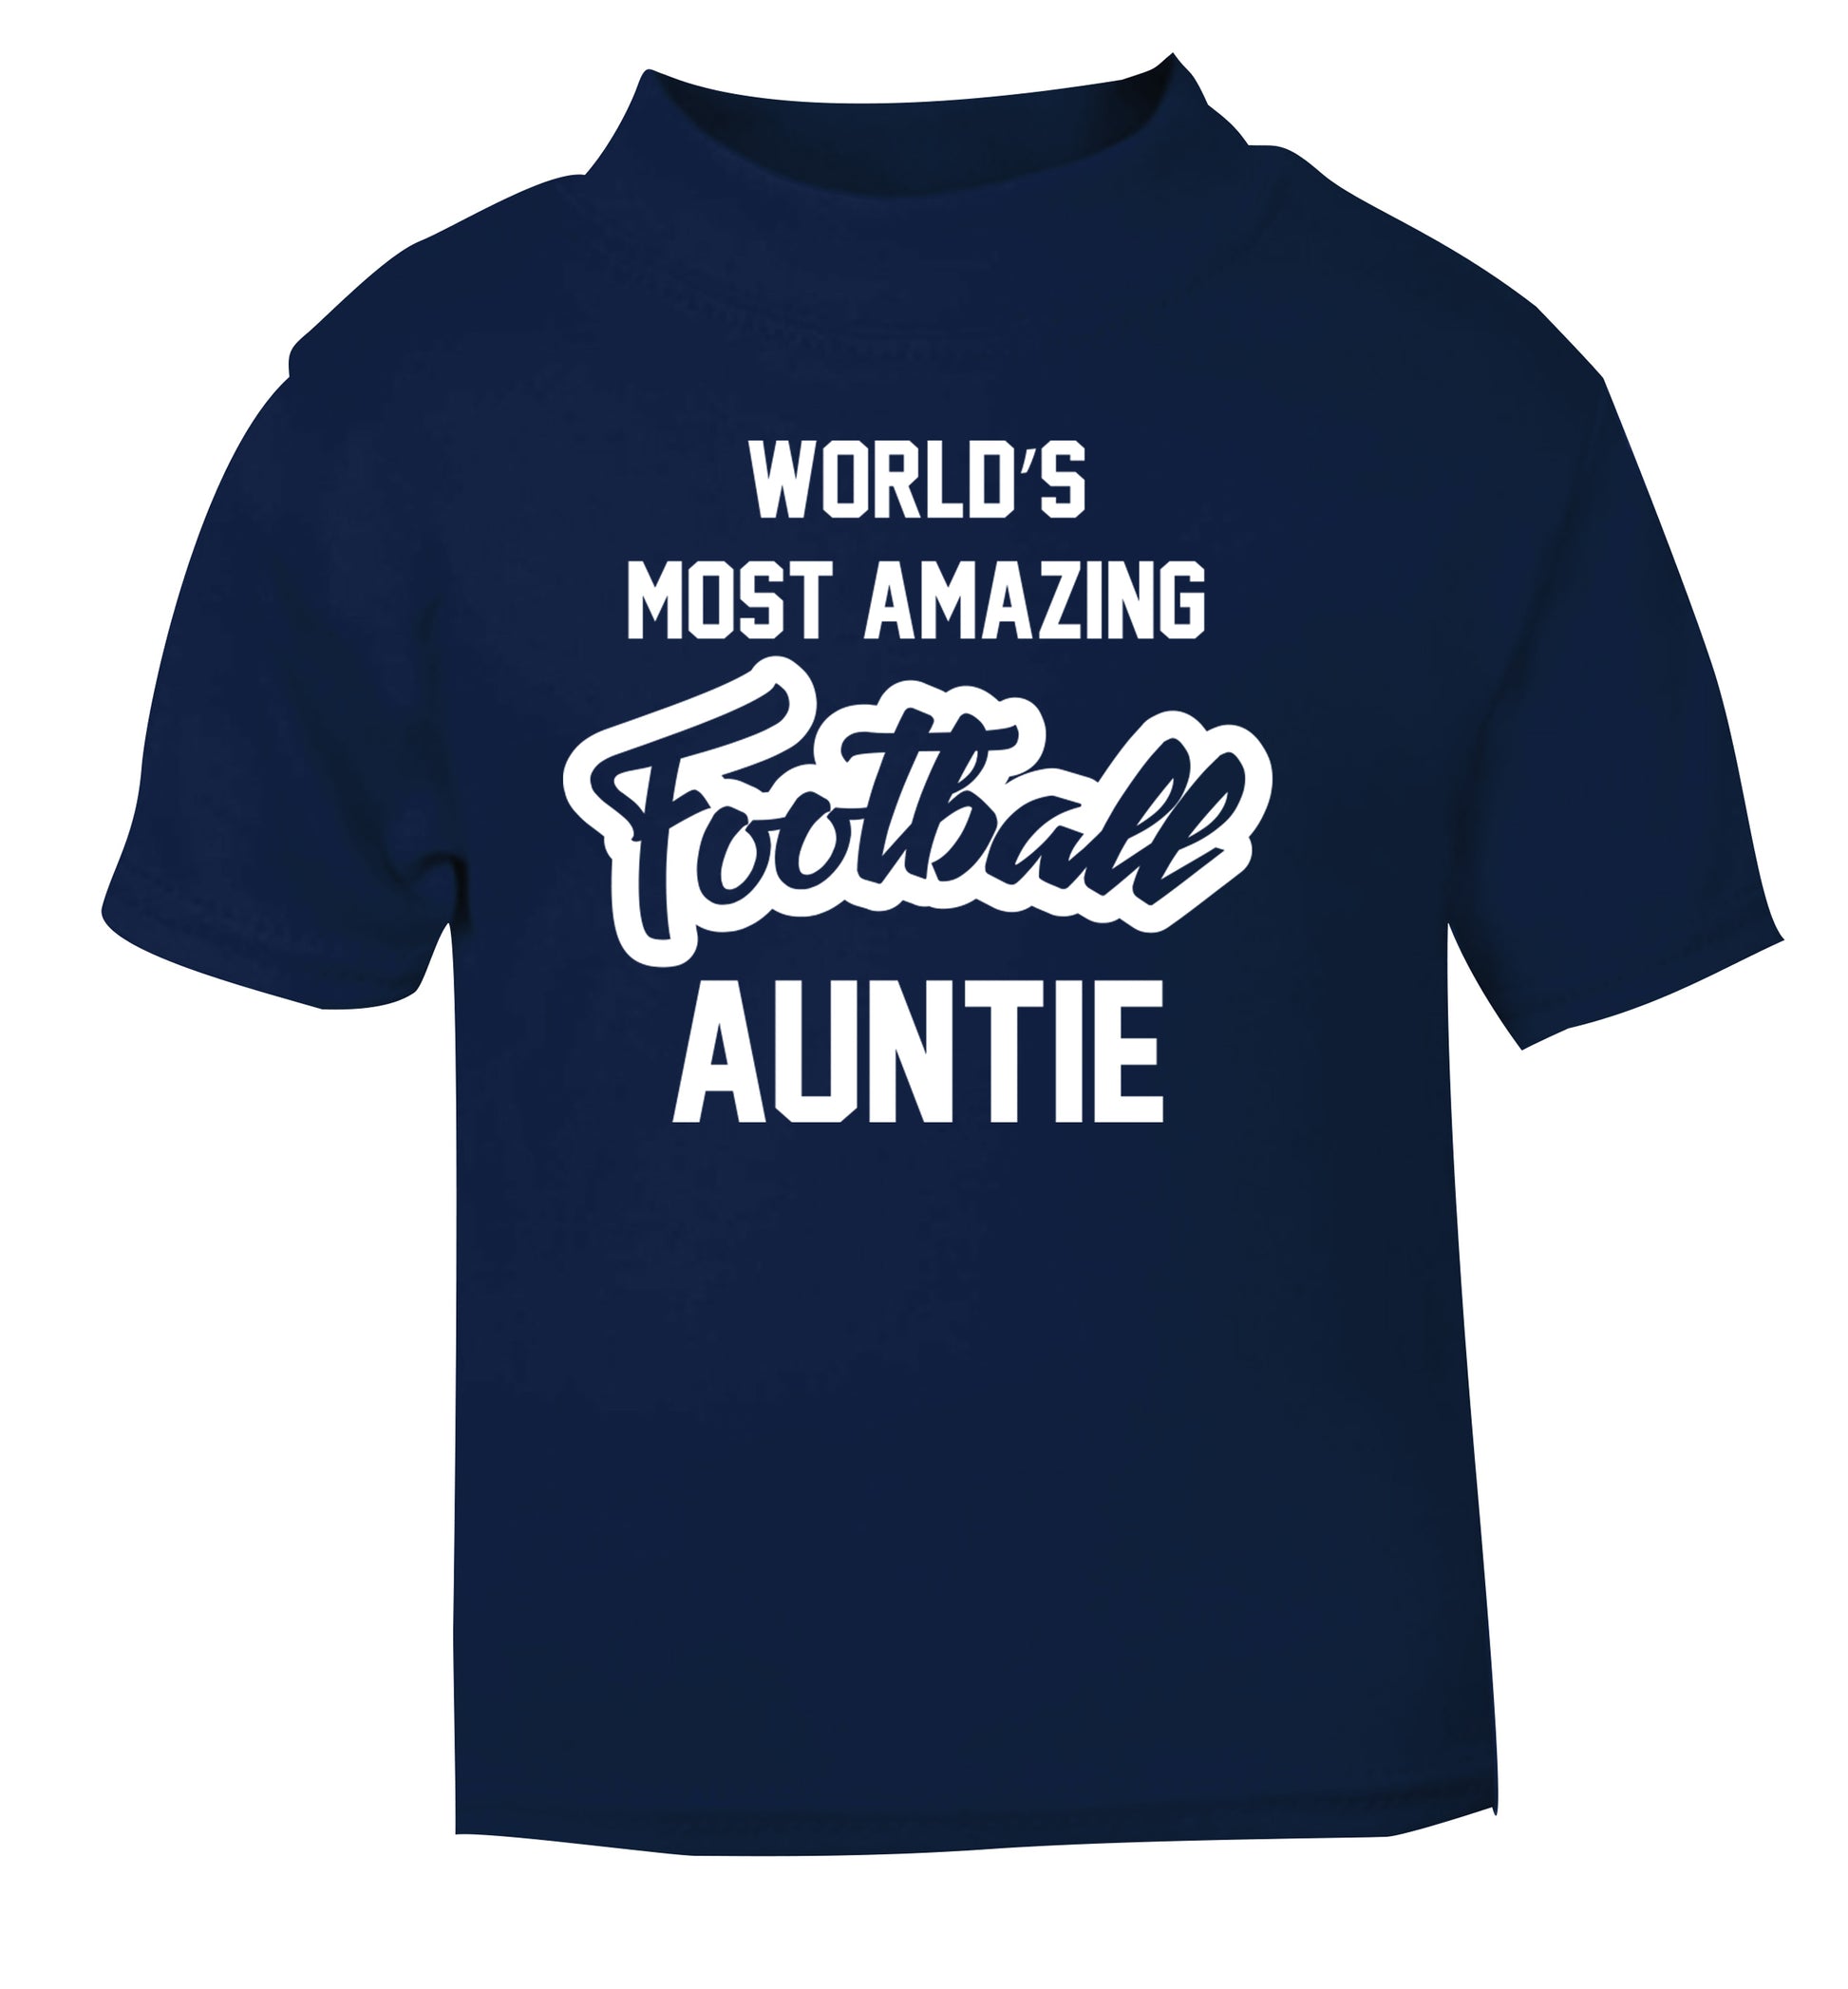 Worlds most amazing football auntie navy Baby Toddler Tshirt 2 Years